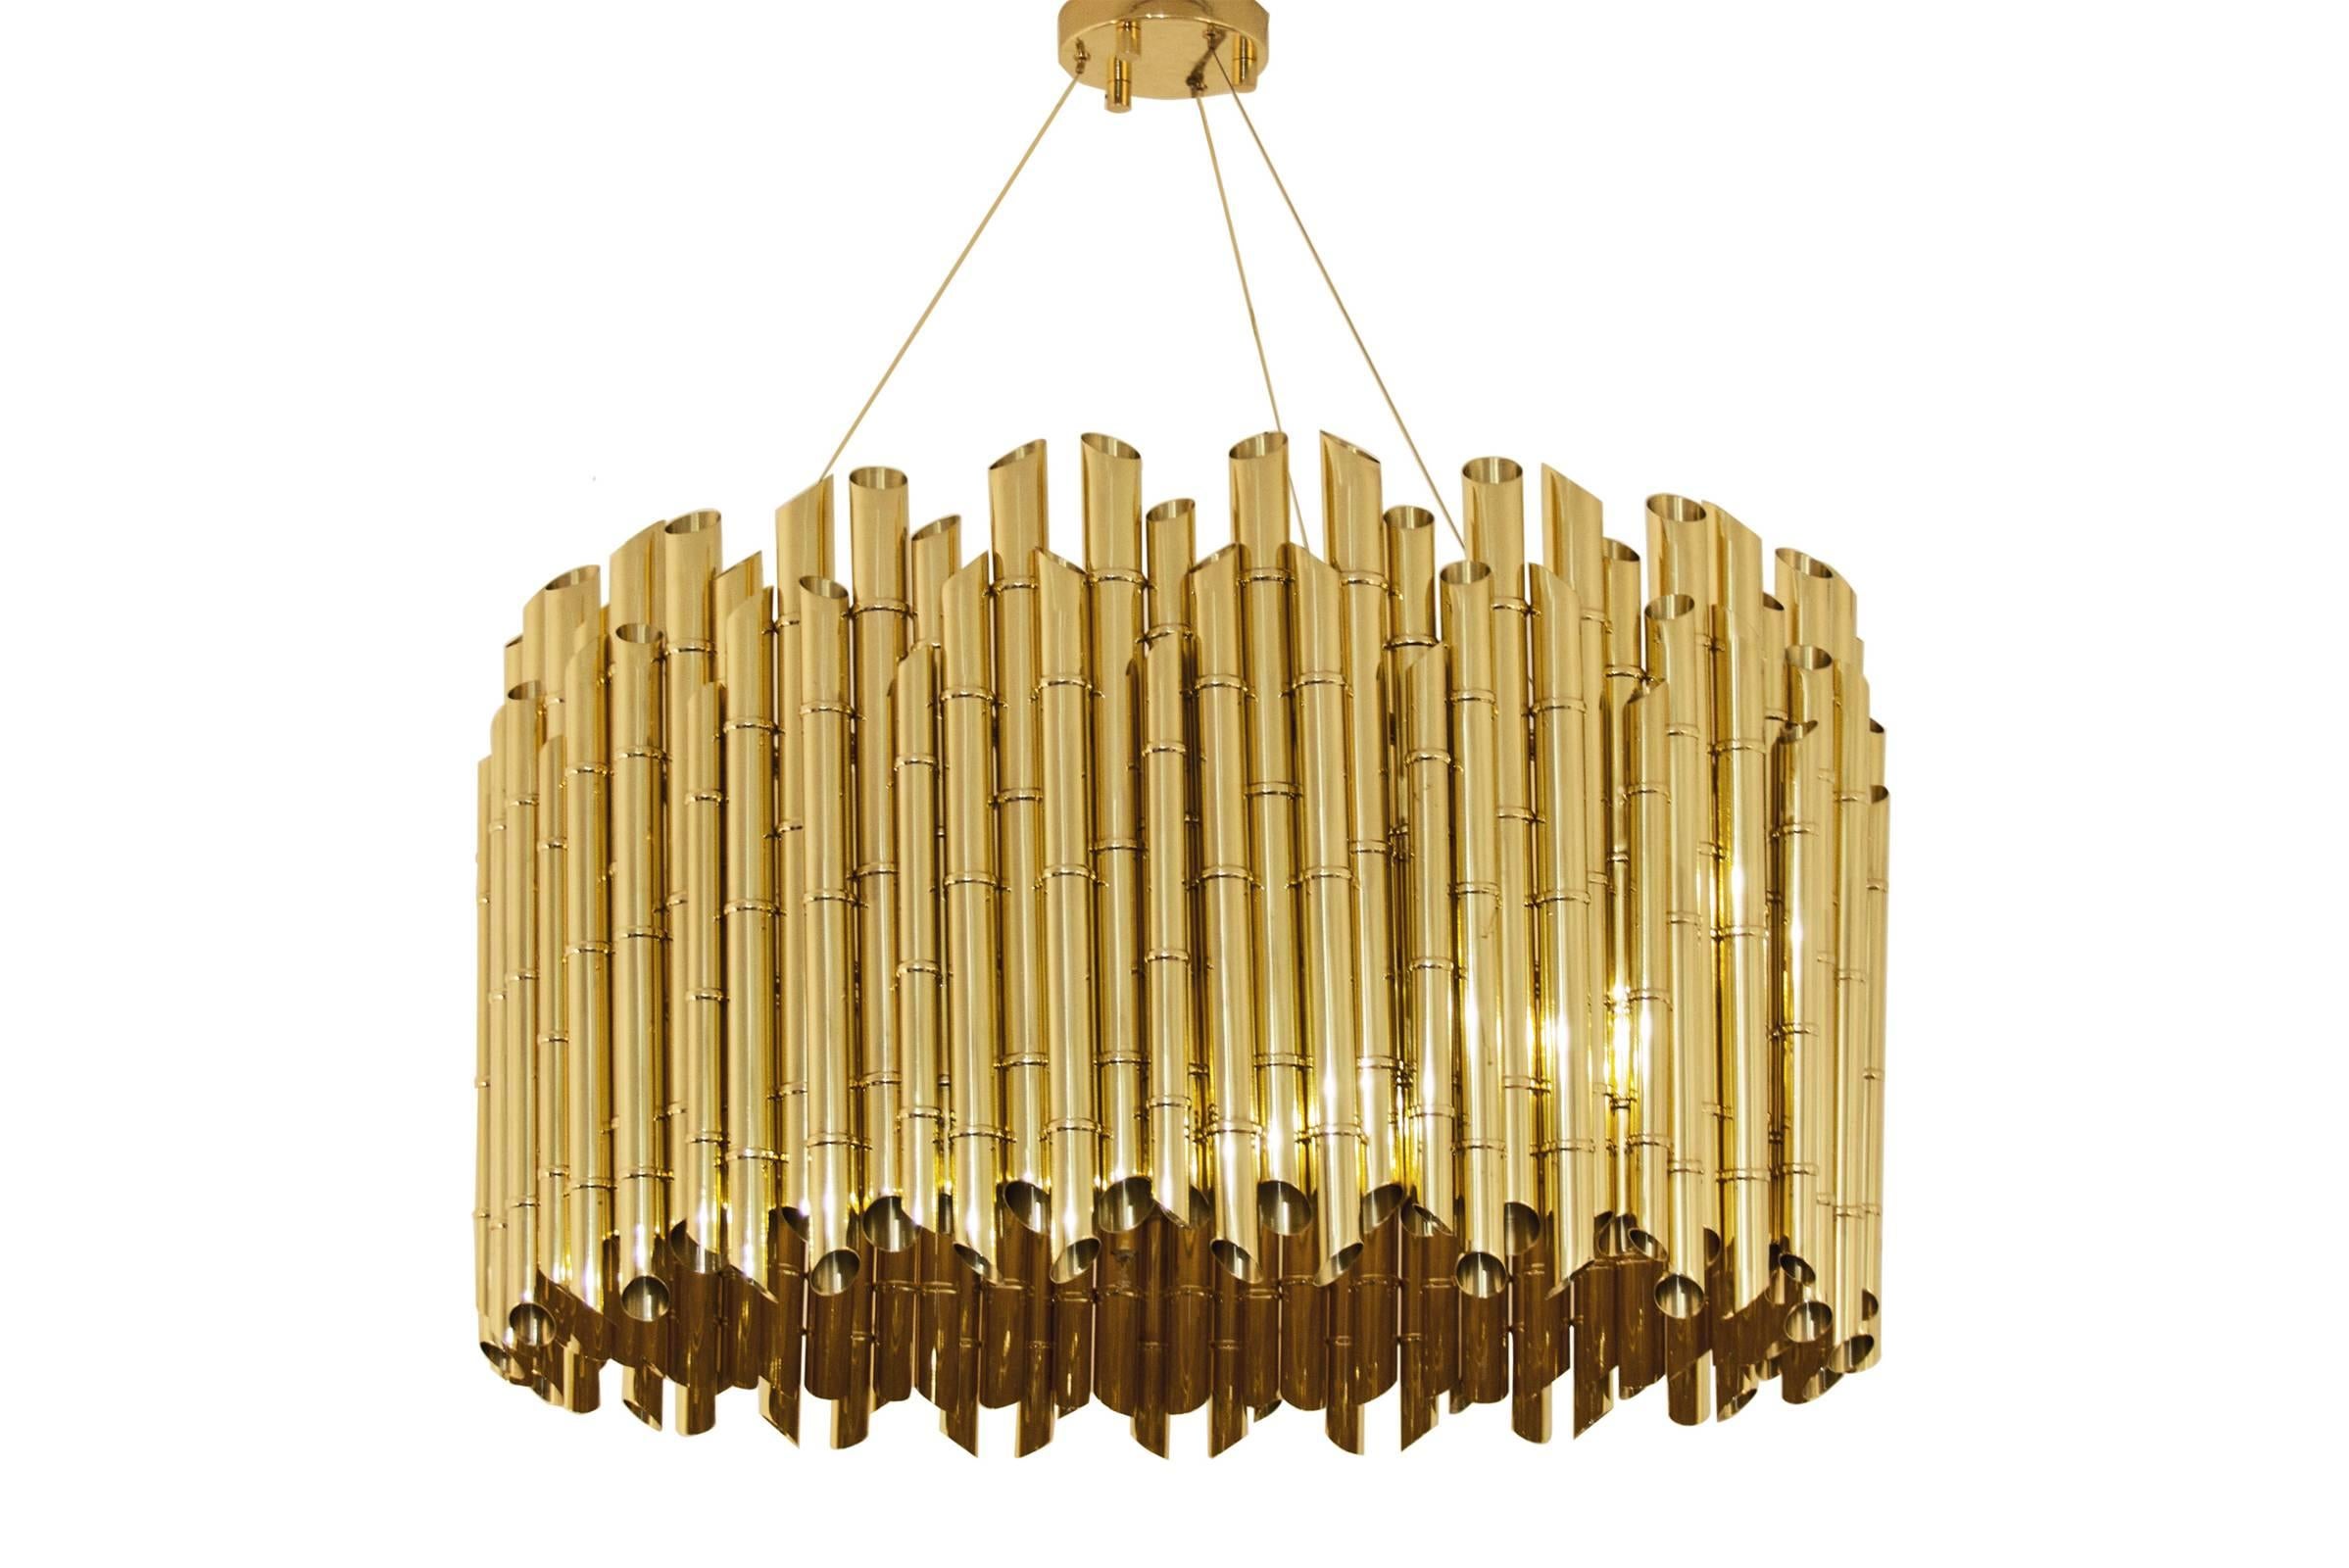 Suspension bamboo in handcrafted glossy brass.
Create a subtle, warm and cozy atmosphere.
Available in pendants. 